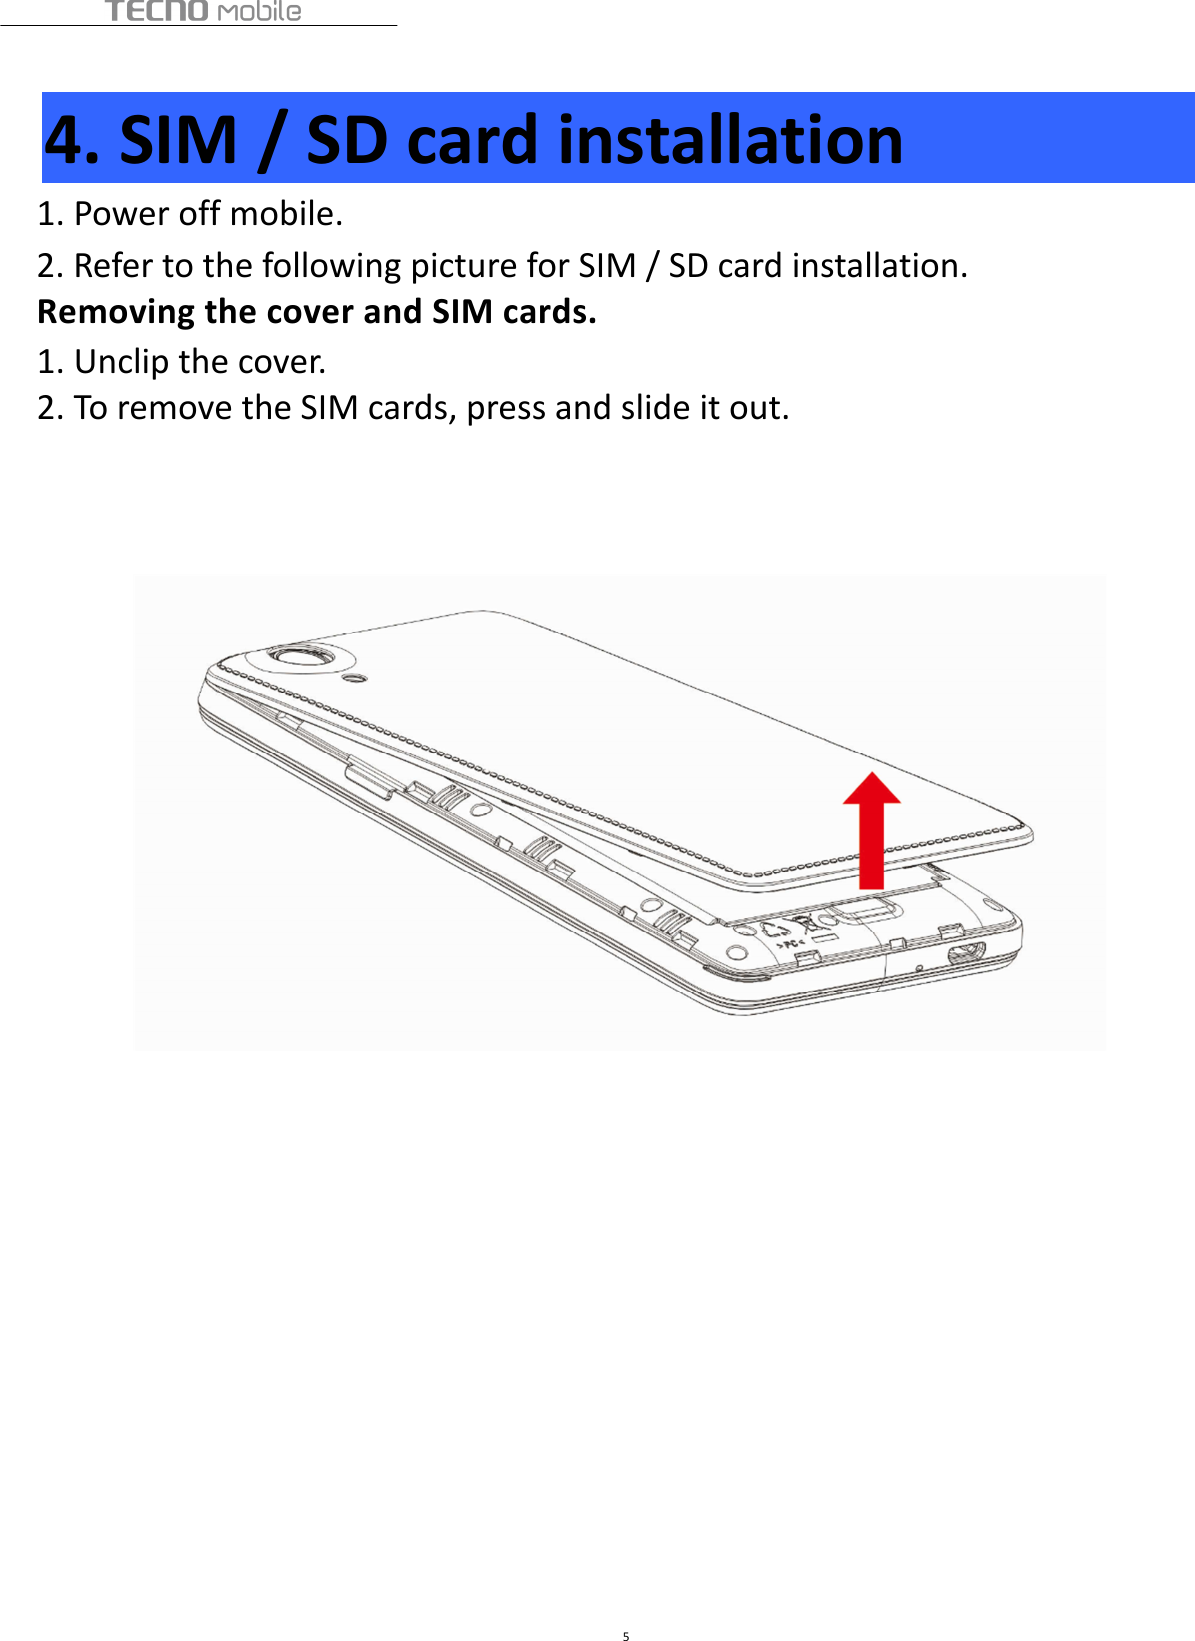  5  4. SIM / SD card installation 1. Power off mobile. 2. Refer to the following picture for SIM / SD card installation. Removing the cover and SIM cards. 1. Unclip the cover. 2. To remove the SIM cards, press and slide it out.                      